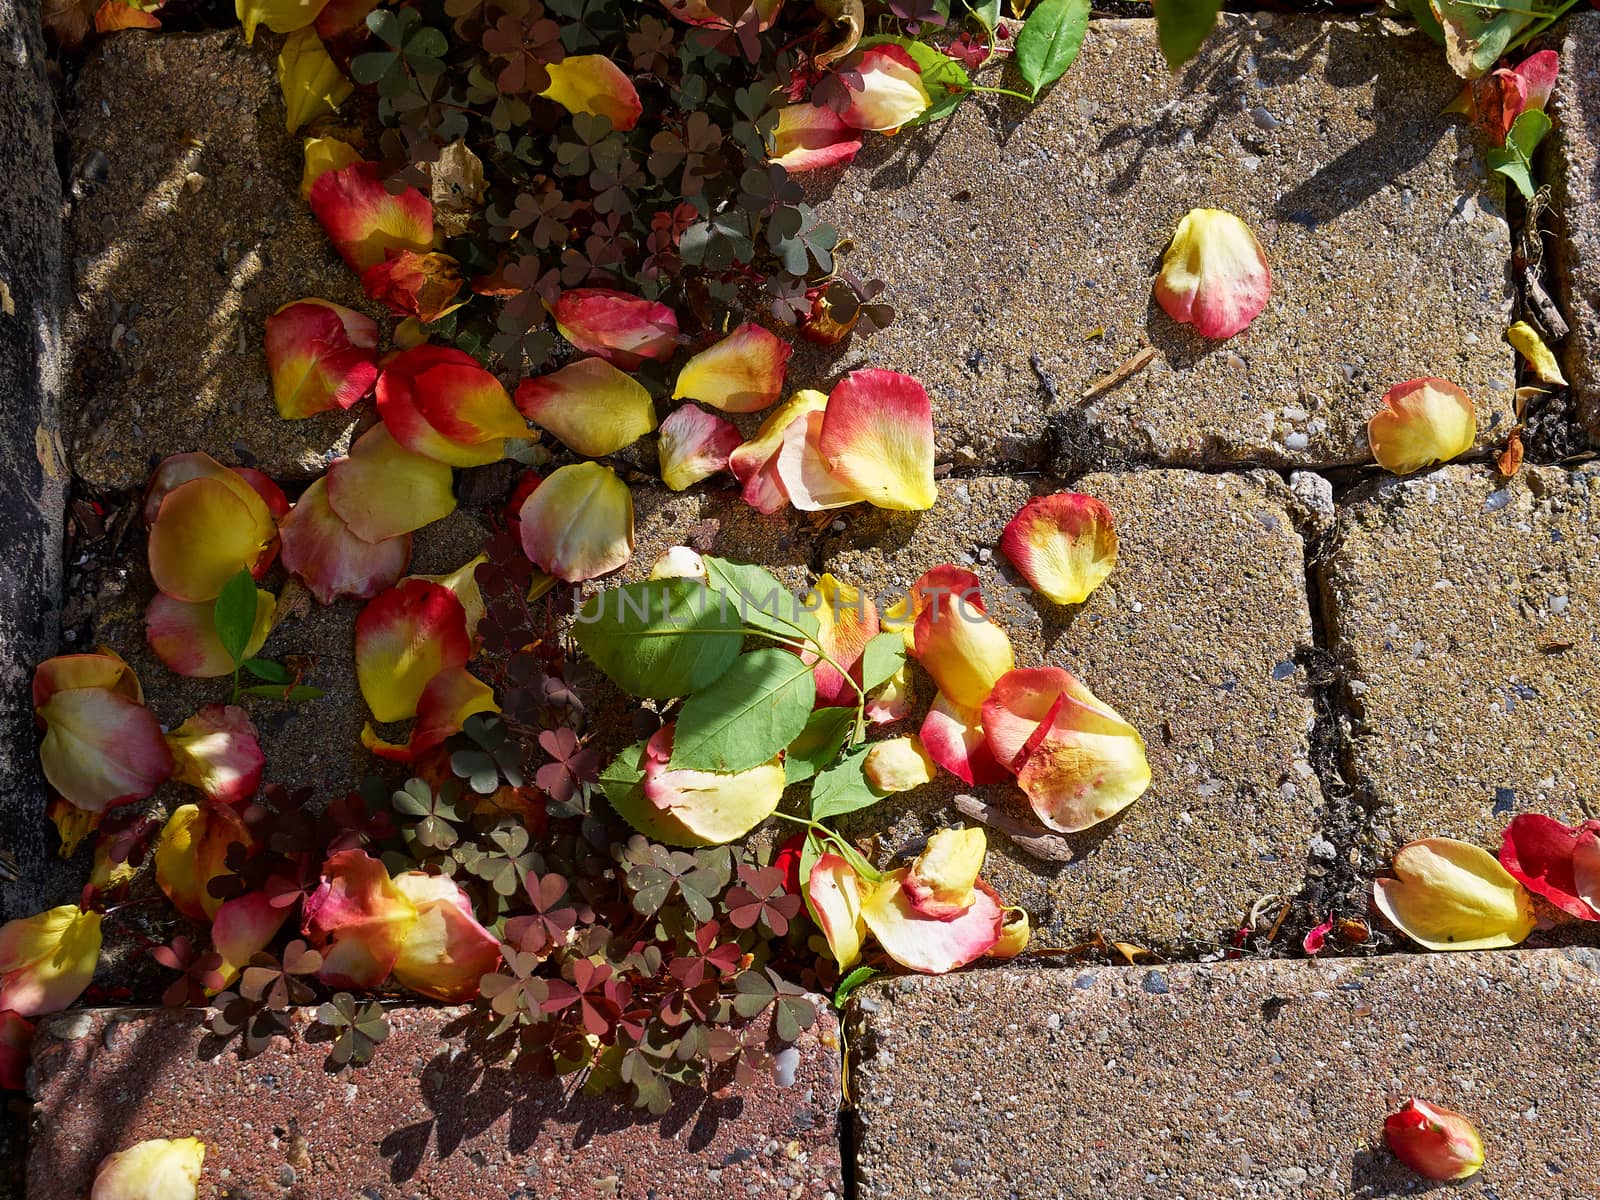 Rose petal leaves on the ground at the fall autumn